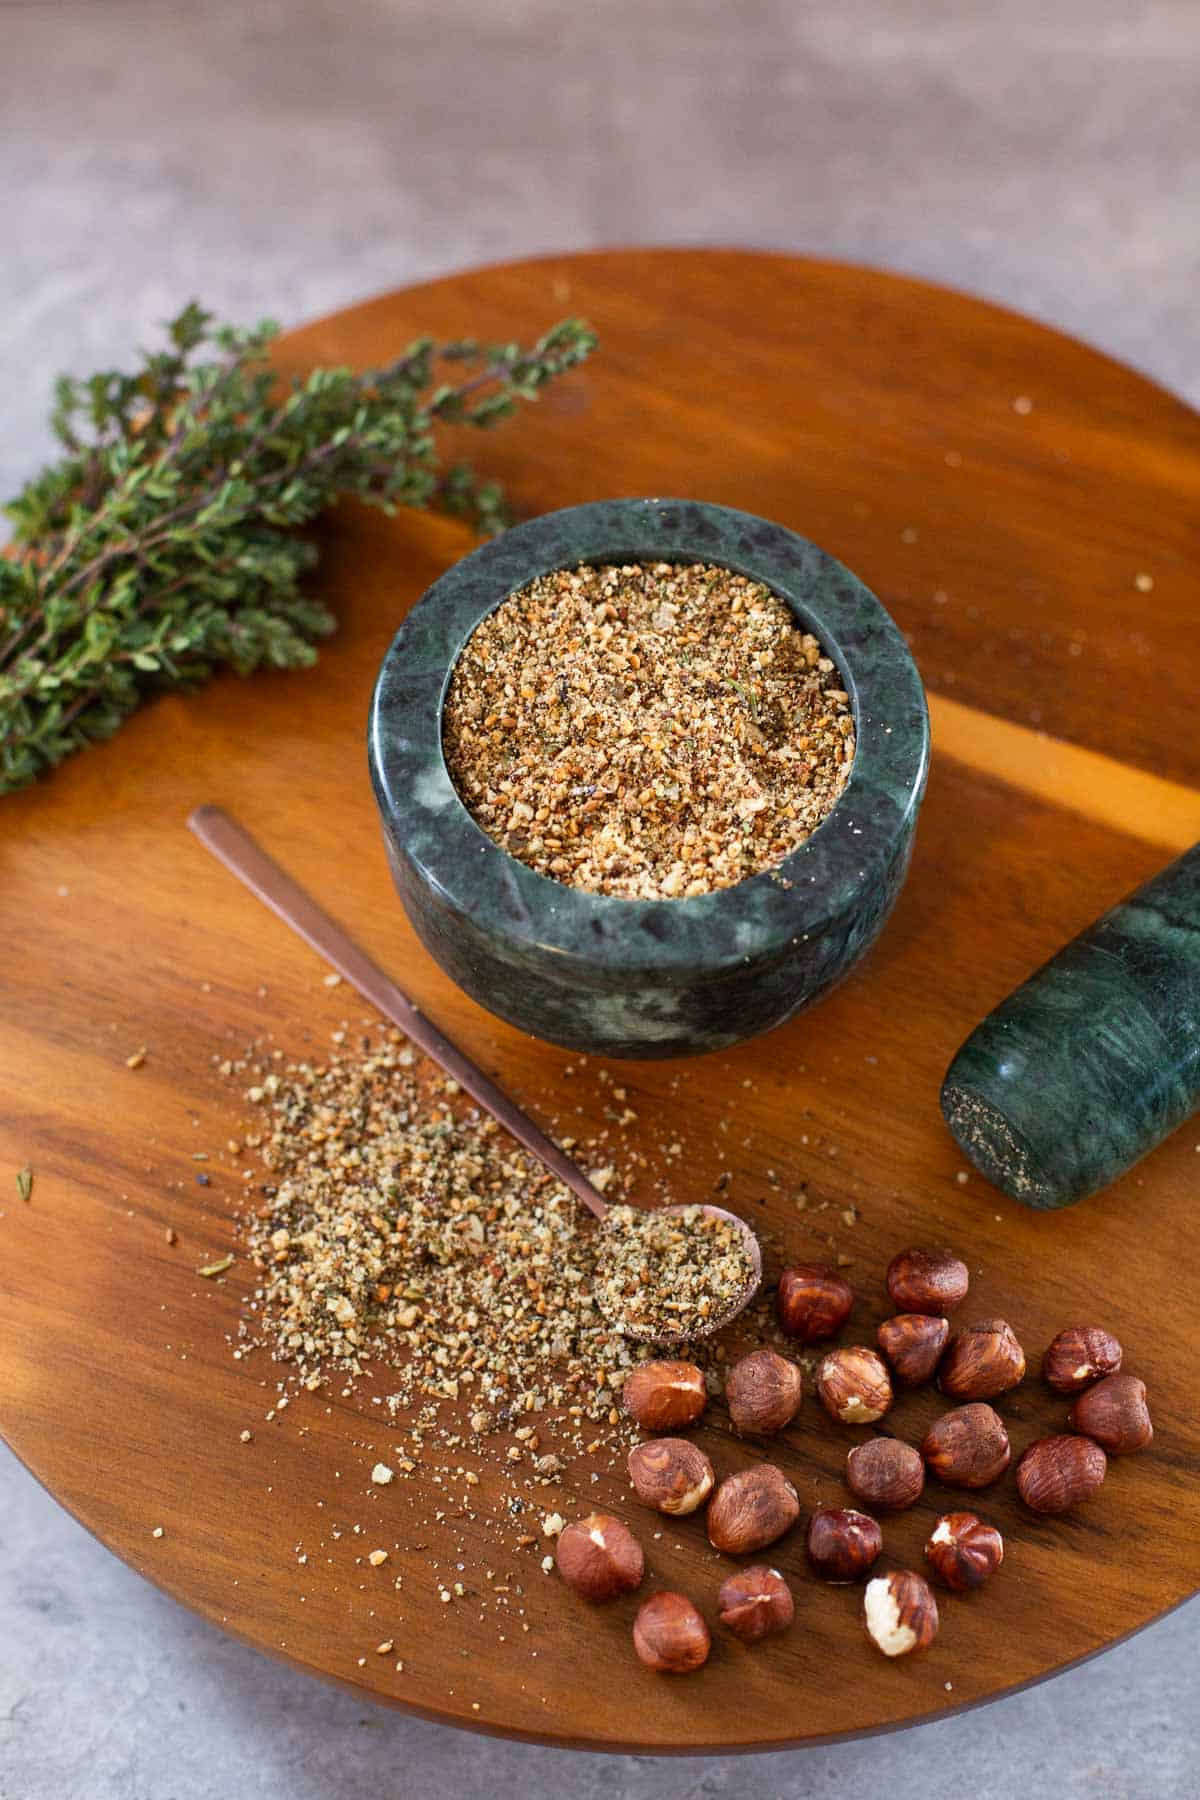 dukka spice in mortar with some spilled on cutting board beside thyme, hazelnuts, and pestle